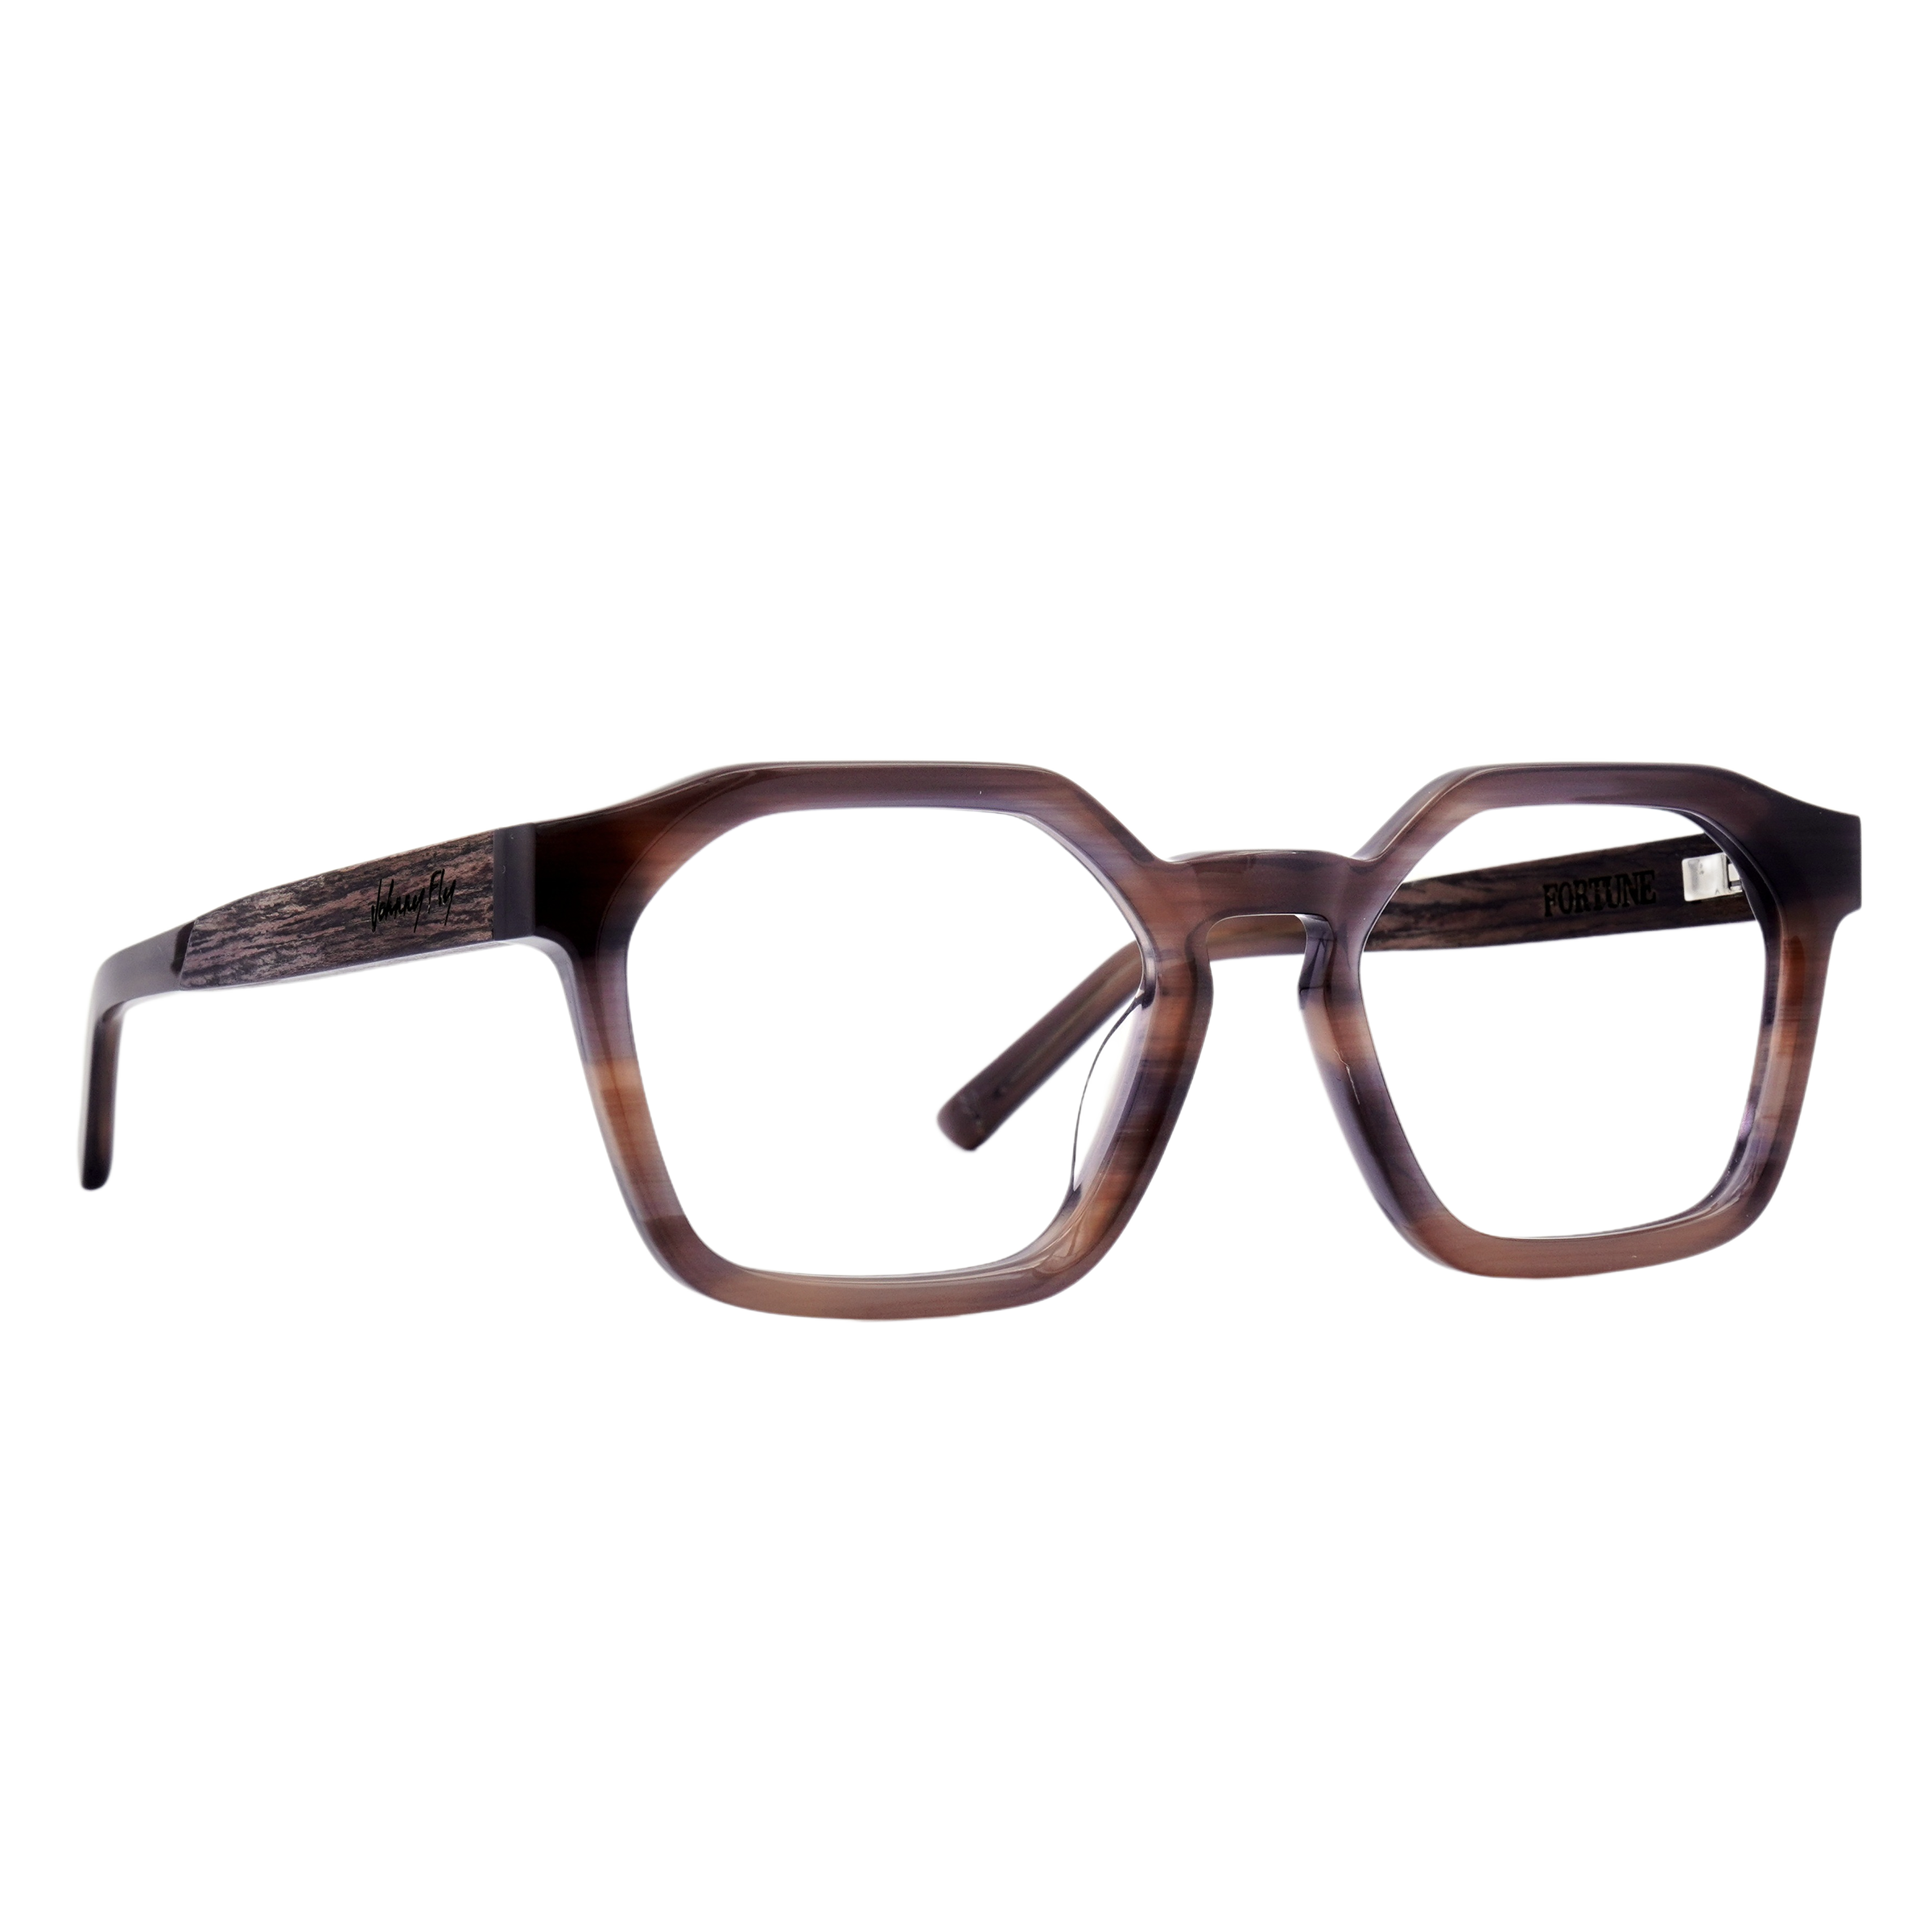 Fortune Bluelight Eyeglasses by Johnny Fly #color_mojave